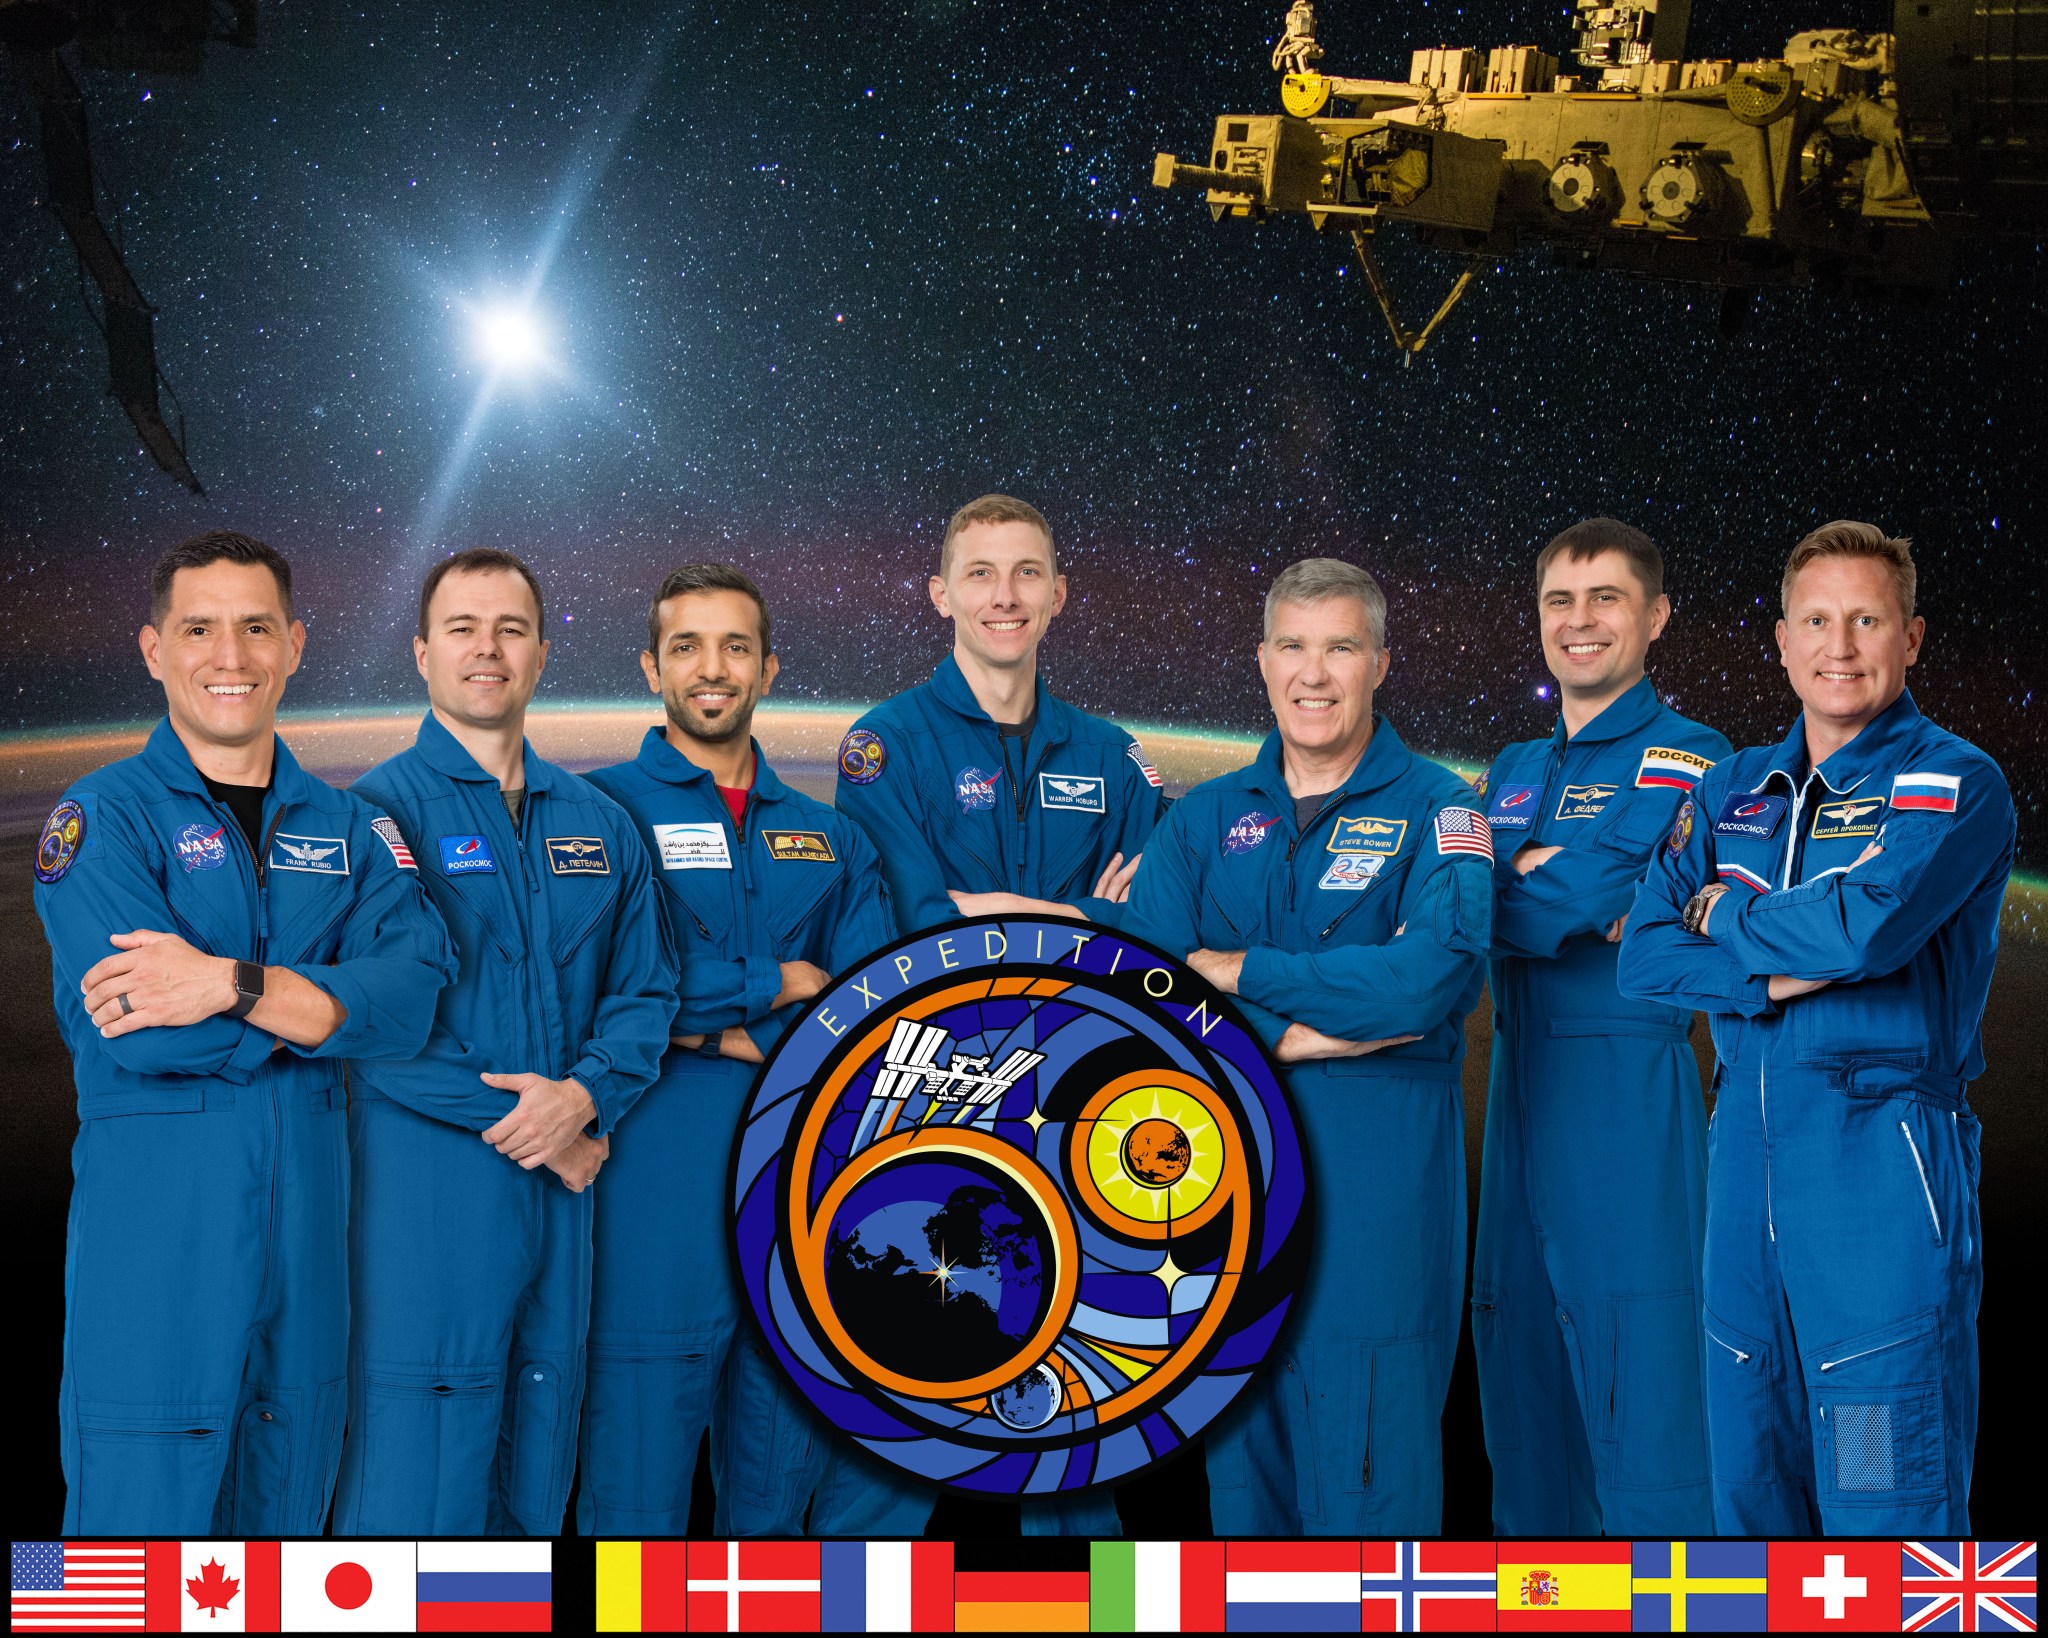 The Crew stand in a line in blue flight suits with the mission patch over their photo.